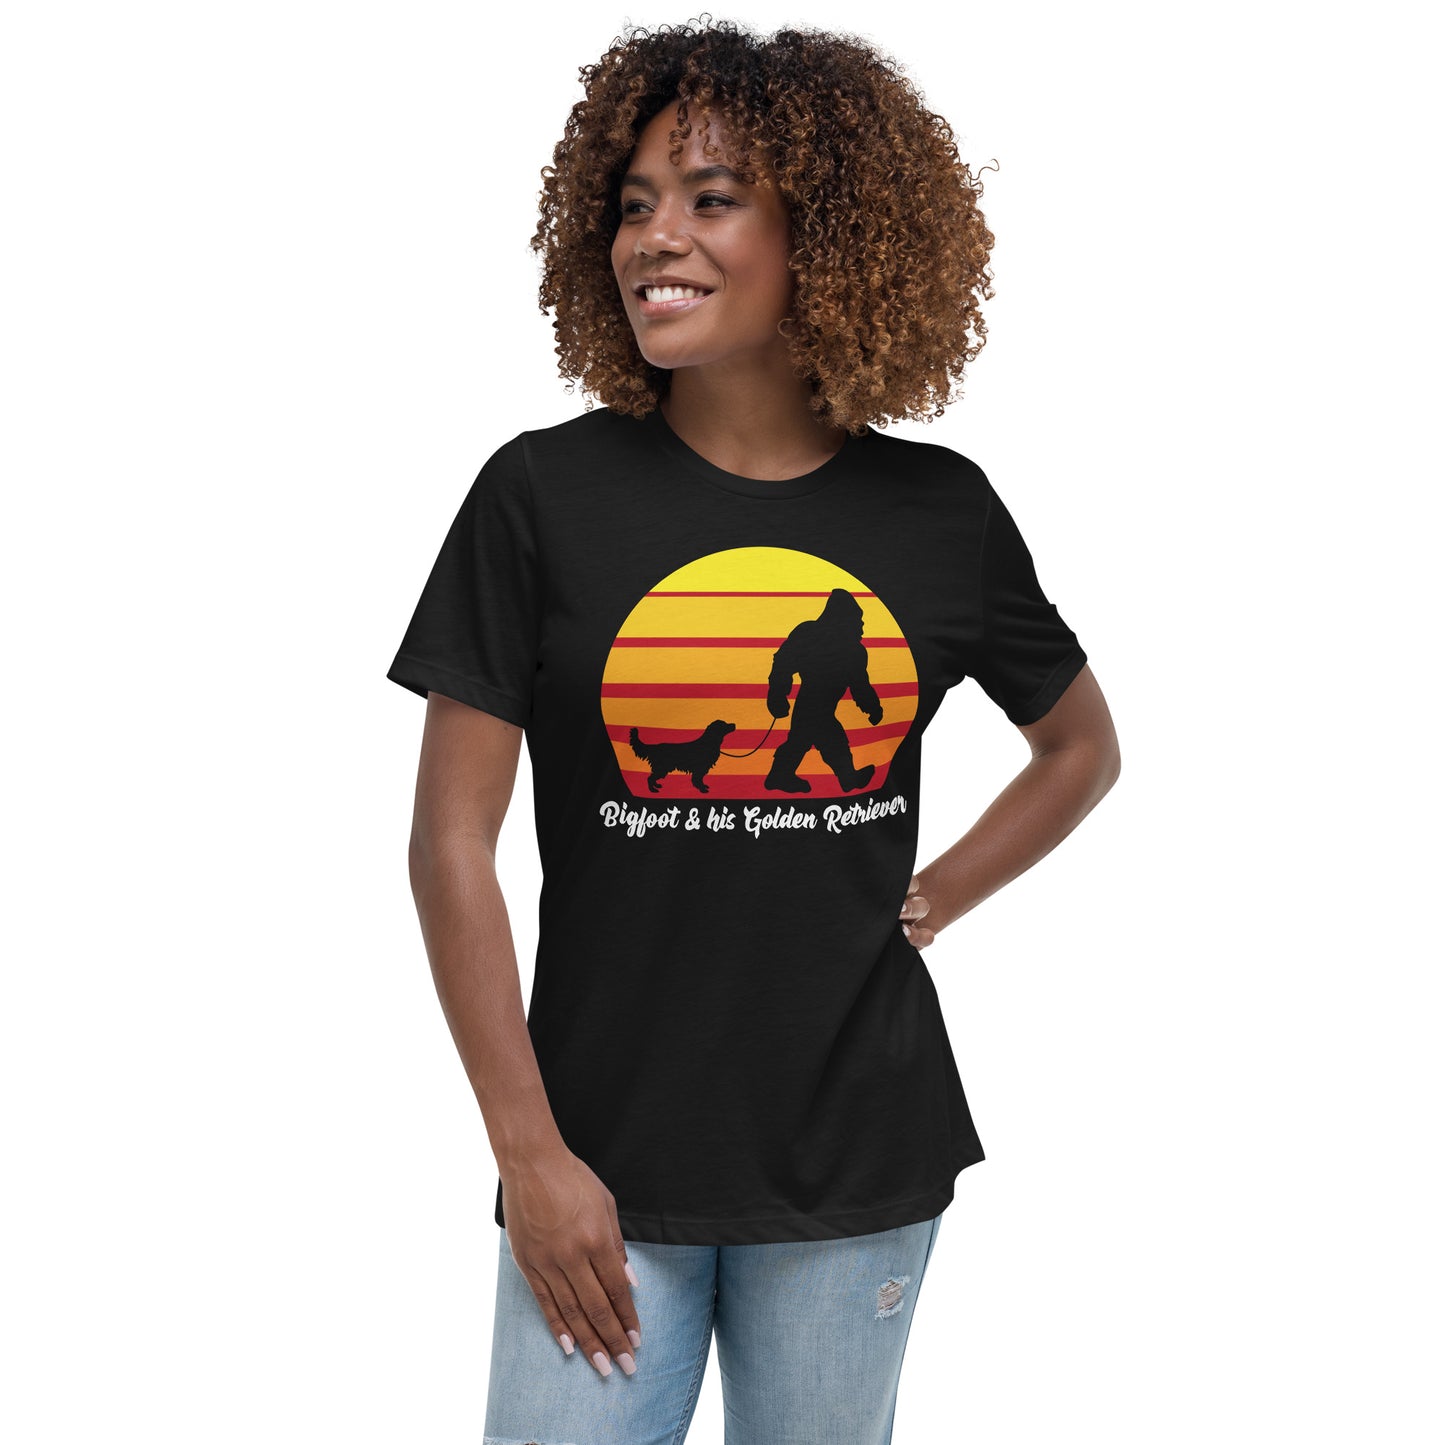 Bigfoot and his Golden Retriever women’s black t-shirt by Dog Artistry.